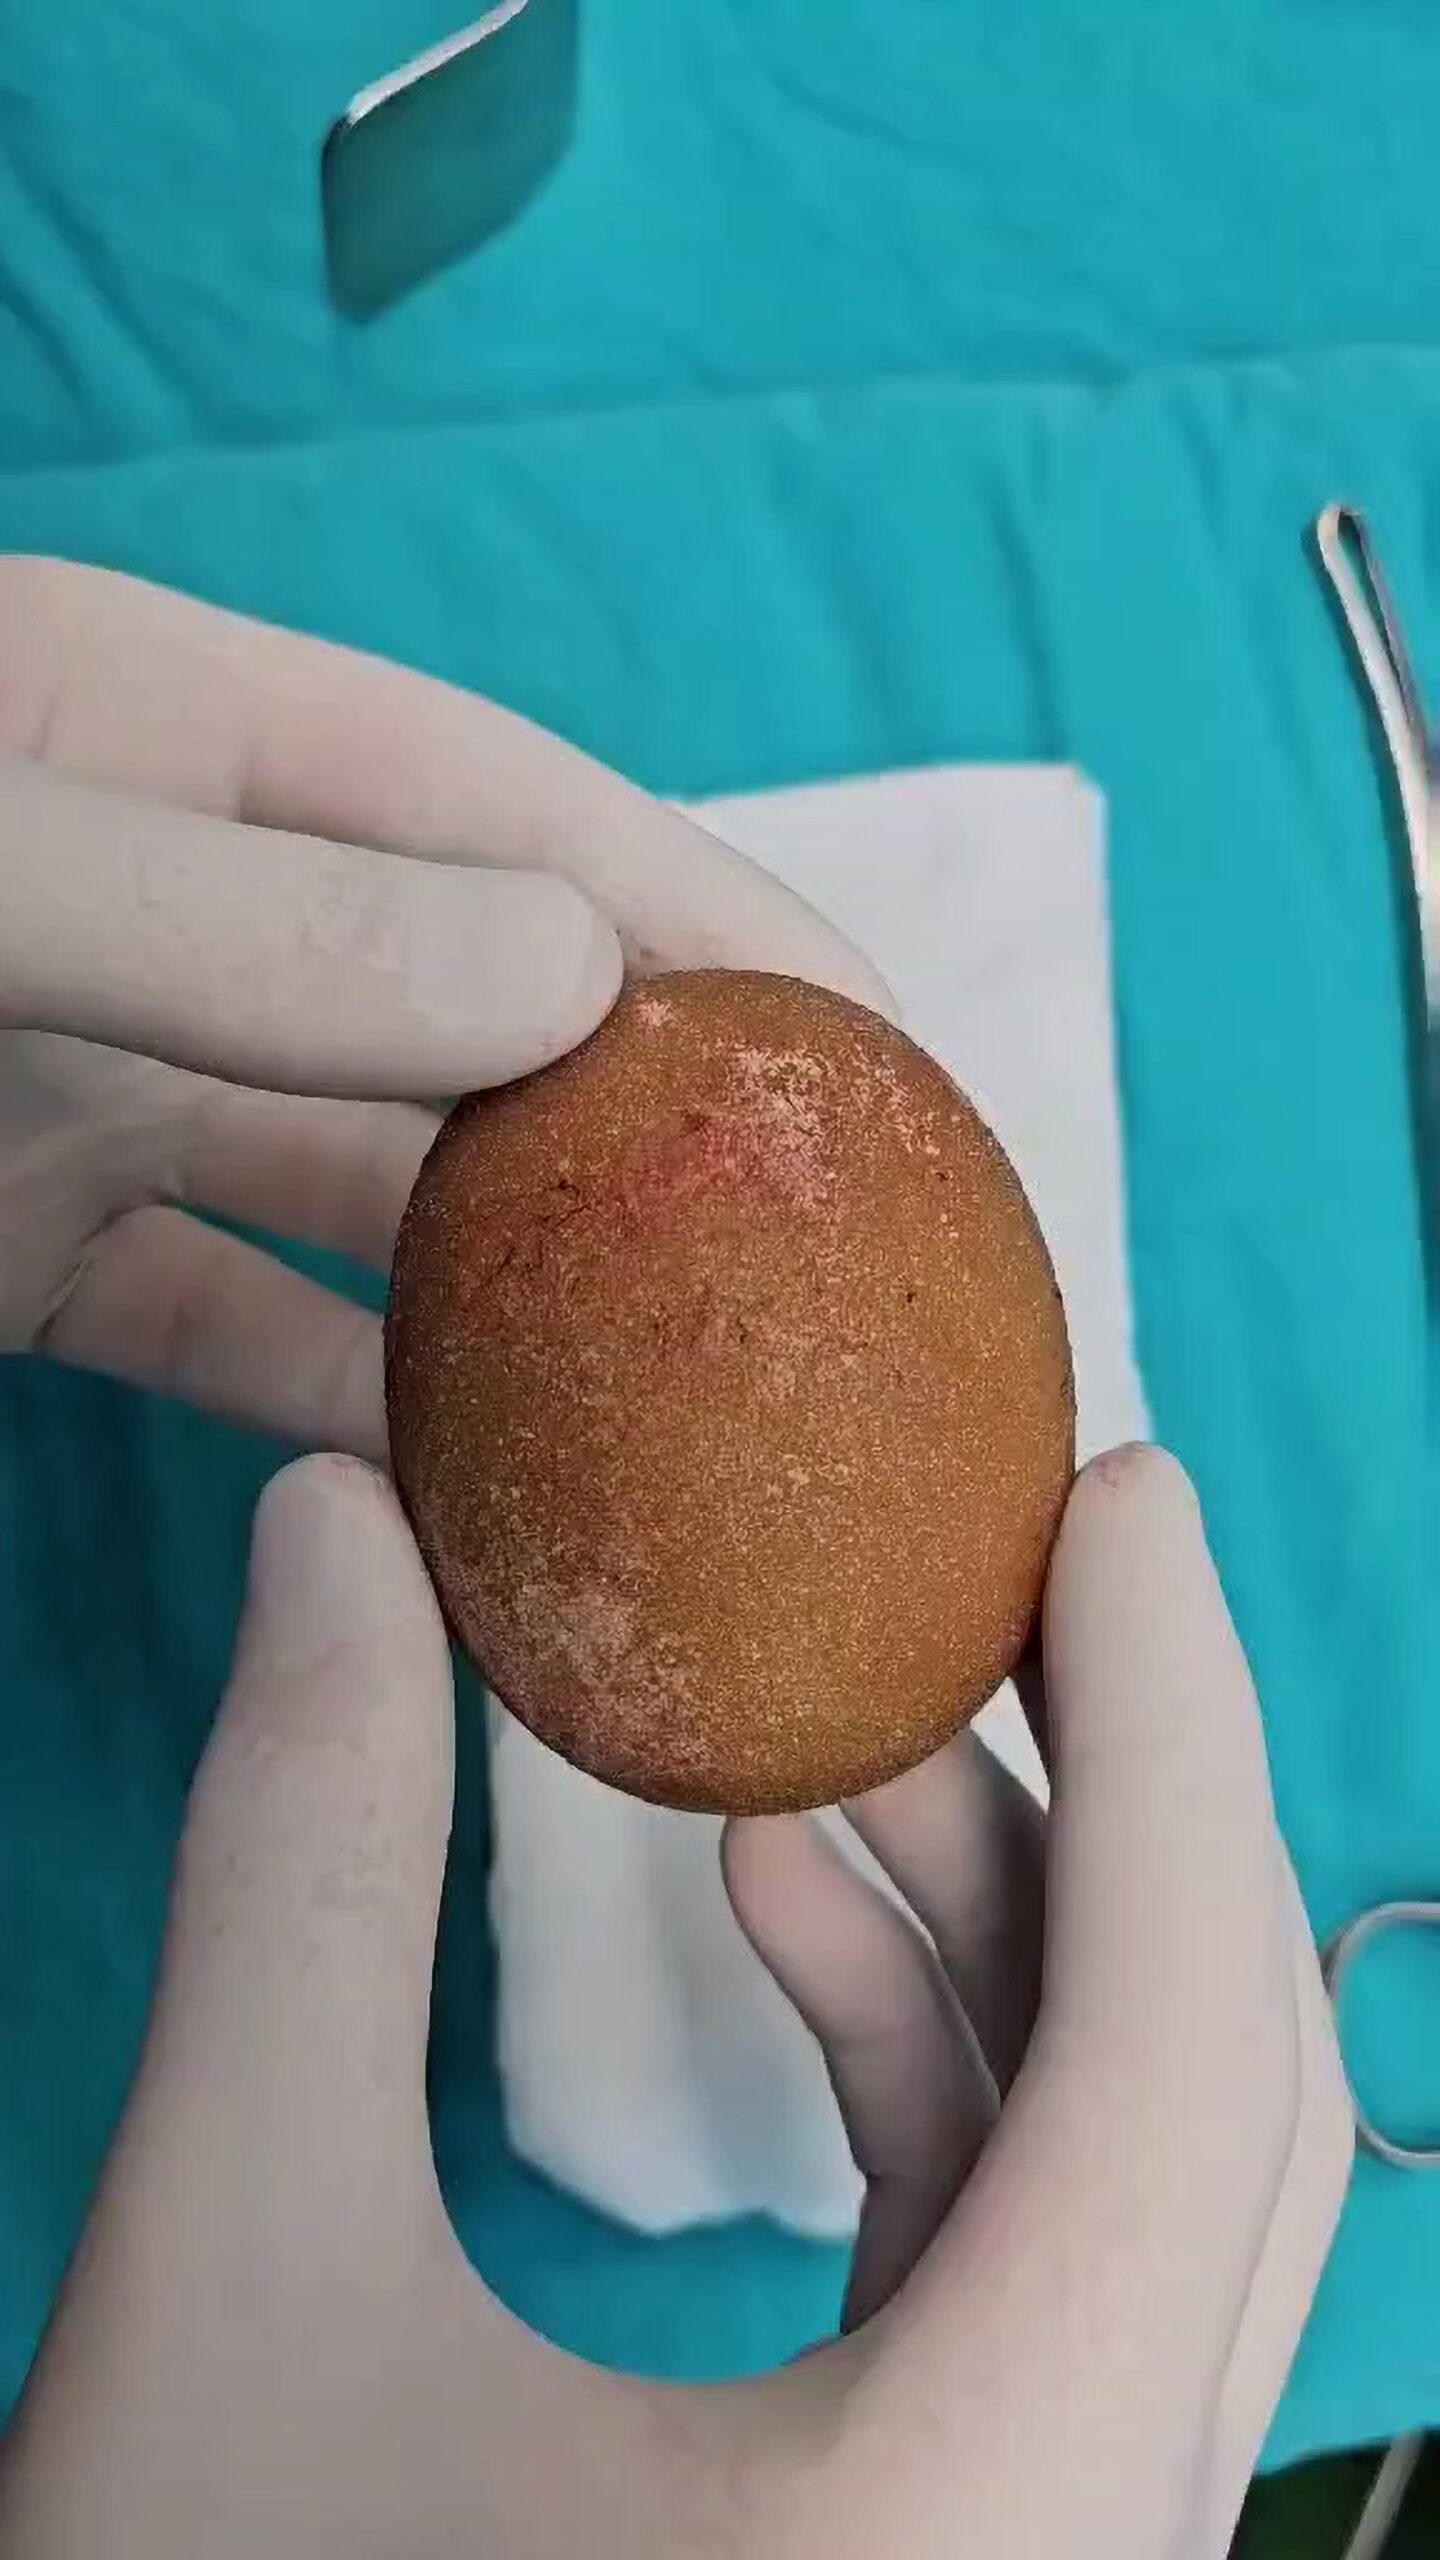 Read more about the article Massive Egg-Shaped Stone Removed From Elderly Patient’s Bladder